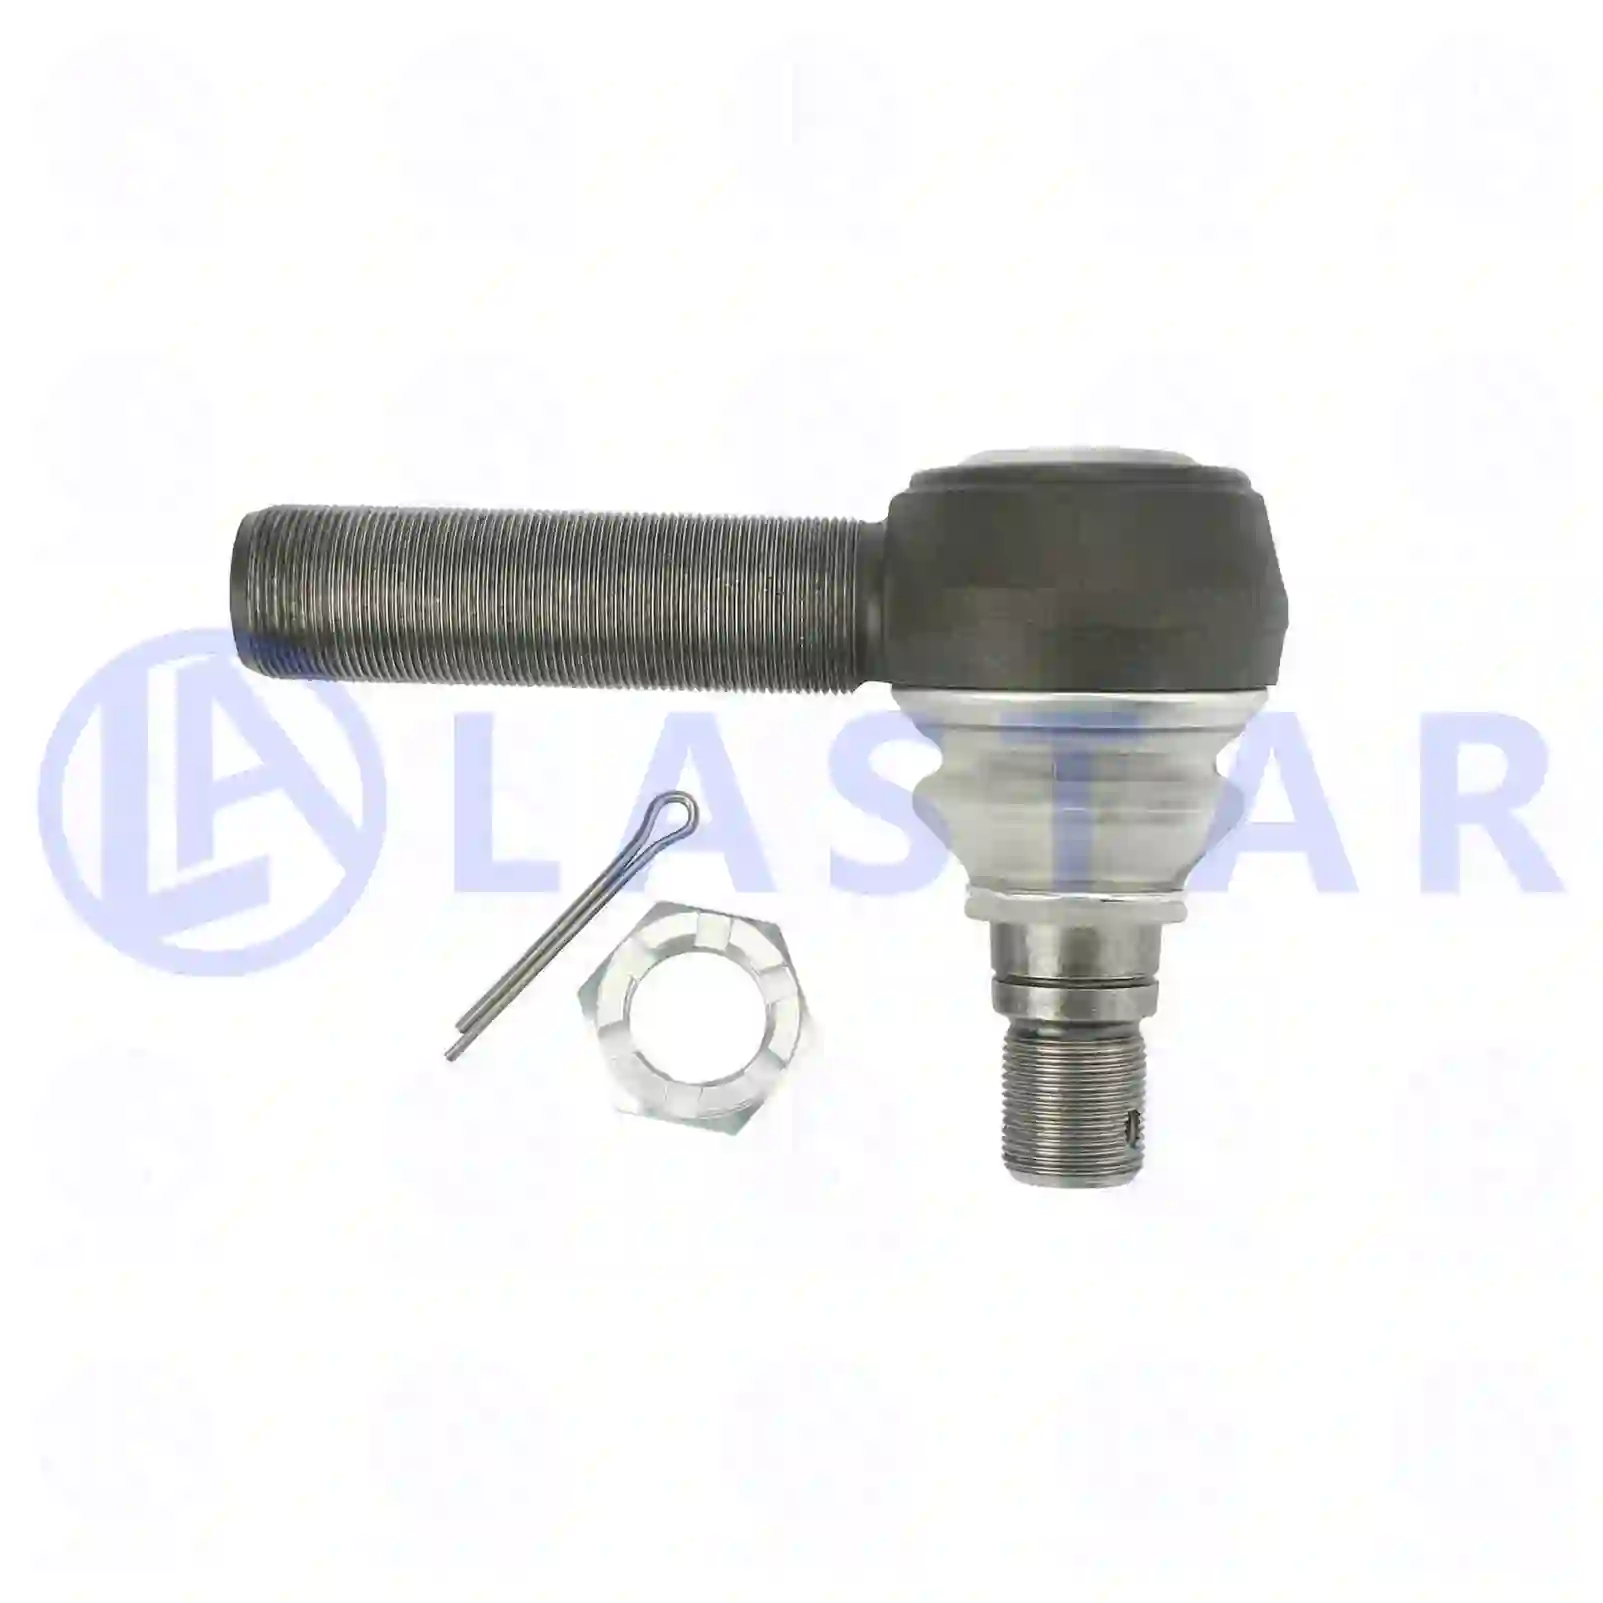 Ball joint, right hand thread, 77705111, 1685552, 42538384, 81953016286, 6293380010, 7420937674, 1358793, 1488890, 1534756, 2115316, 2244706, 20937674, ZG40381-0008 ||  77705111 Lastar Spare Part | Truck Spare Parts, Auotomotive Spare Parts Ball joint, right hand thread, 77705111, 1685552, 42538384, 81953016286, 6293380010, 7420937674, 1358793, 1488890, 1534756, 2115316, 2244706, 20937674, ZG40381-0008 ||  77705111 Lastar Spare Part | Truck Spare Parts, Auotomotive Spare Parts